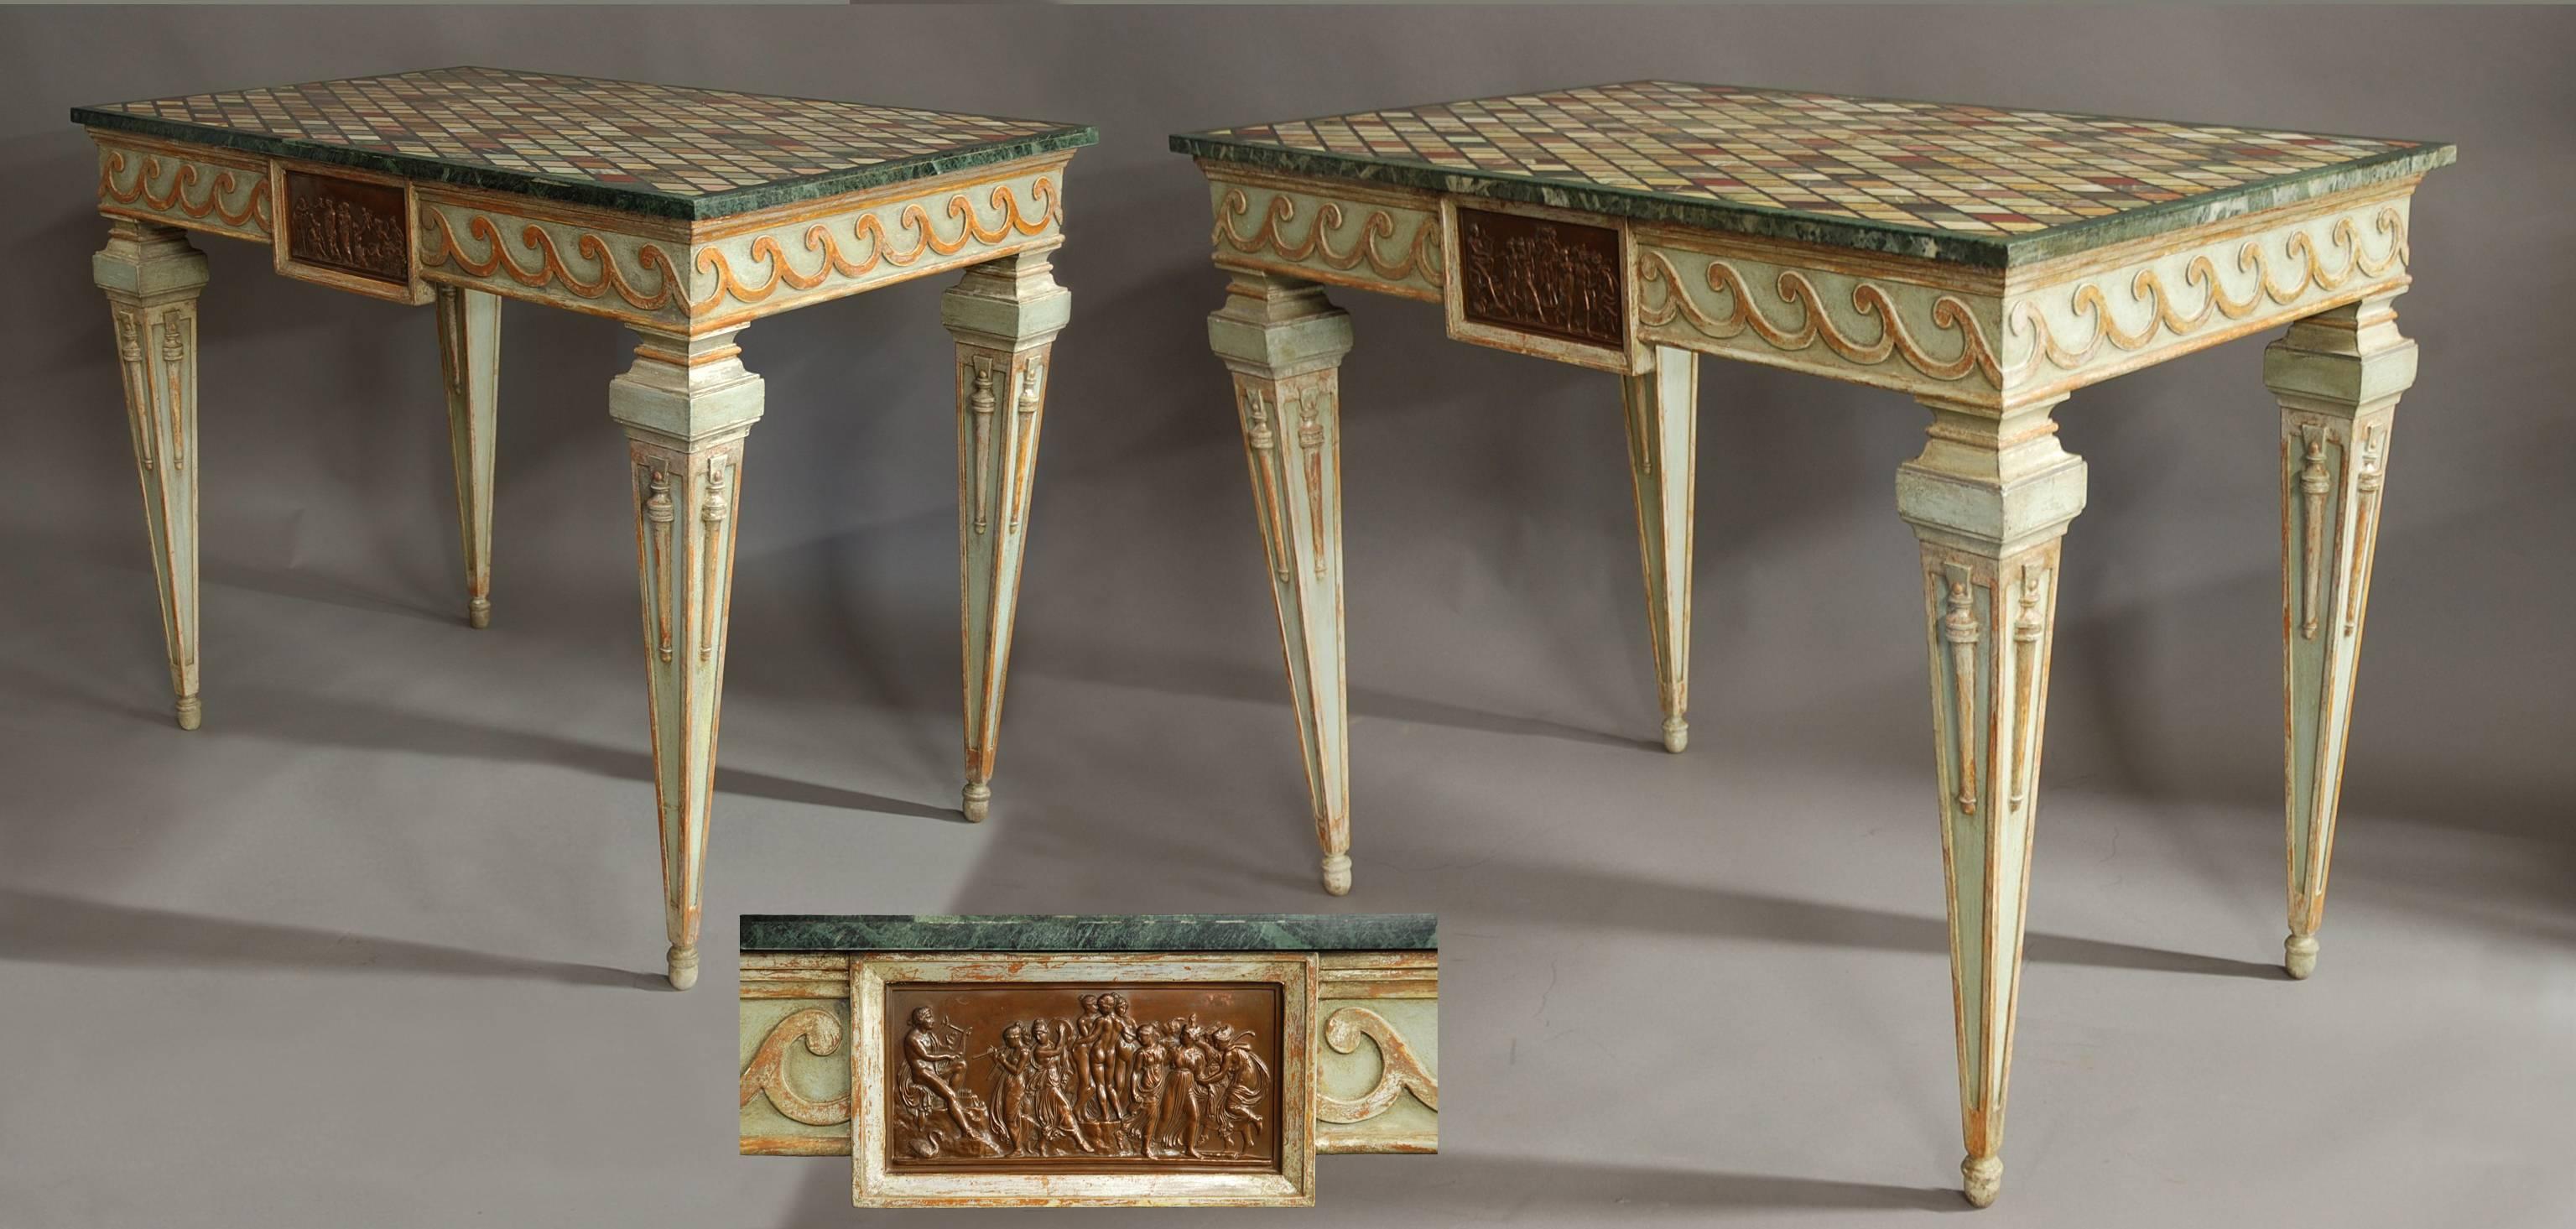 A highly decorative pair of early 20th century Italian painted console tables with specimen marble tops.

These tables consist of highly decorative specimen marble tops with various inlaid stones and marbles to create a lattice design.

These